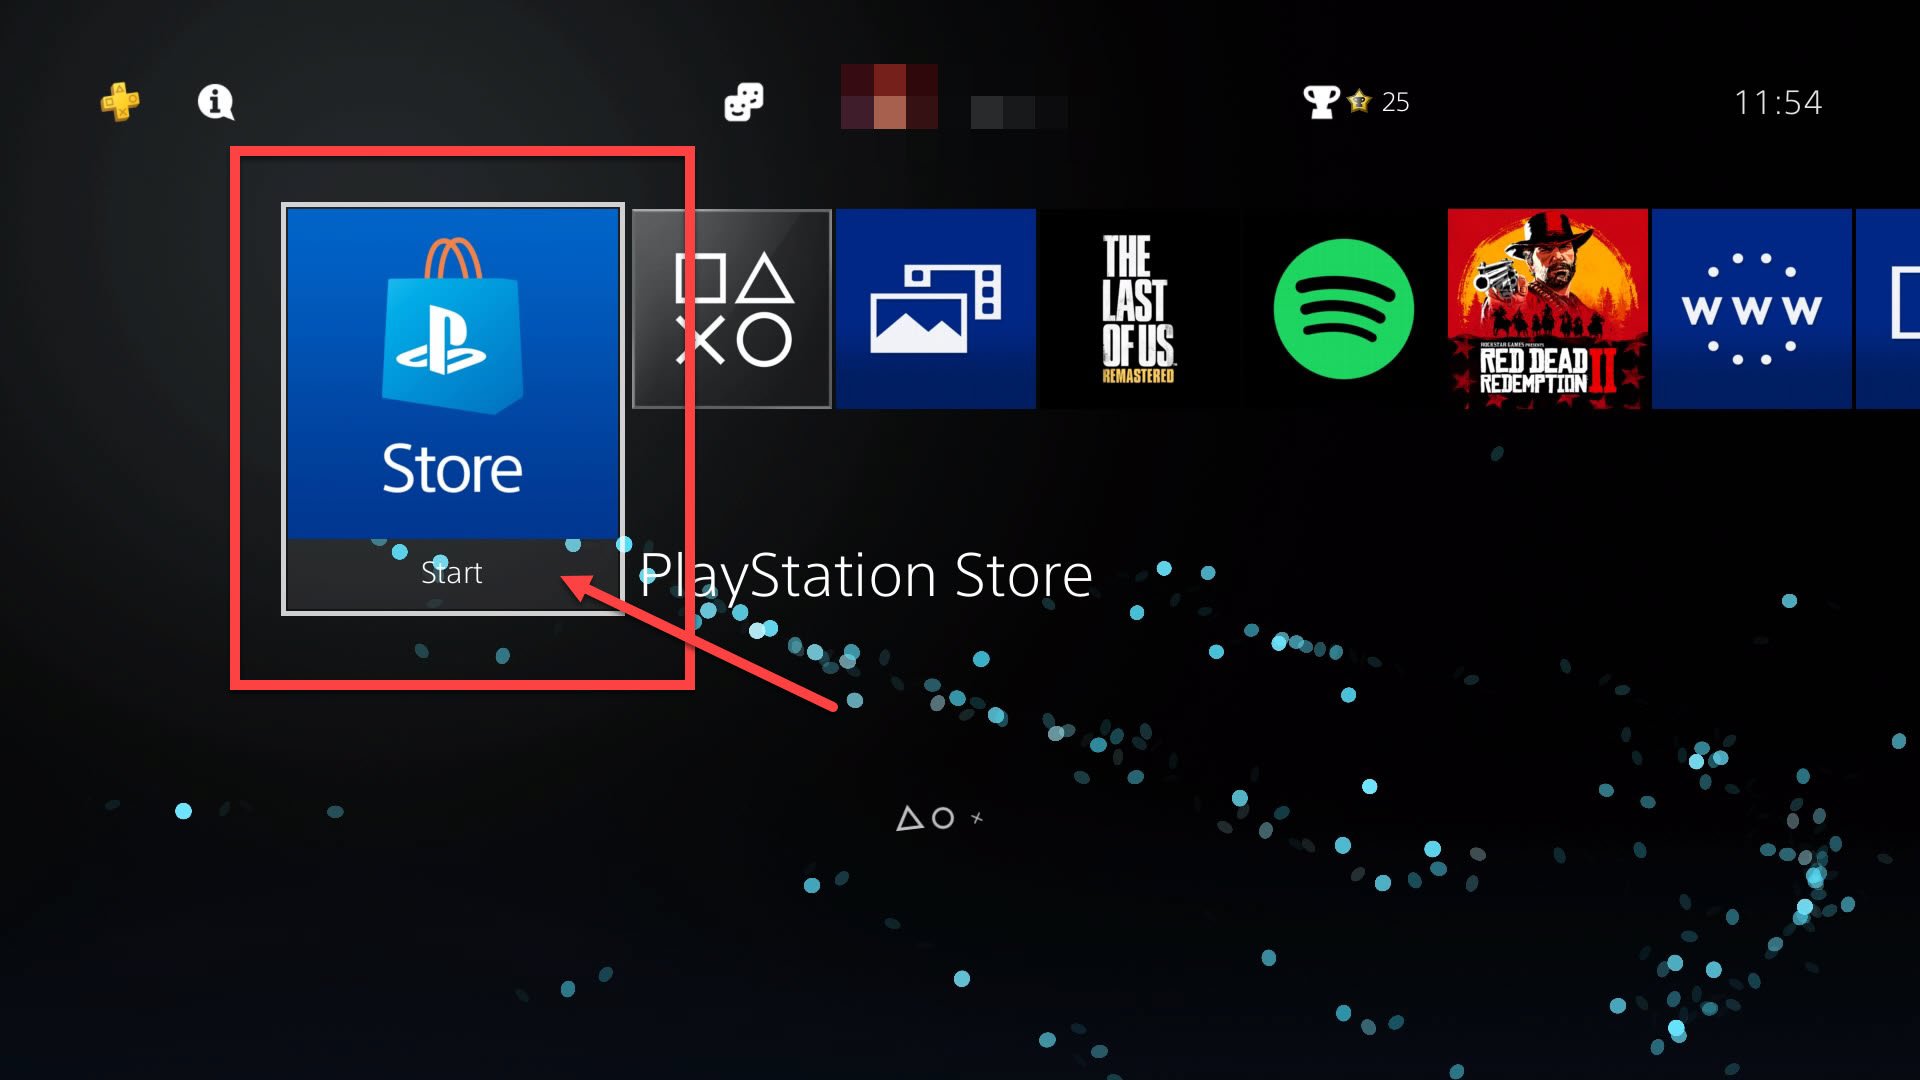 How to remove (Credit/Debit) card details from PS4?